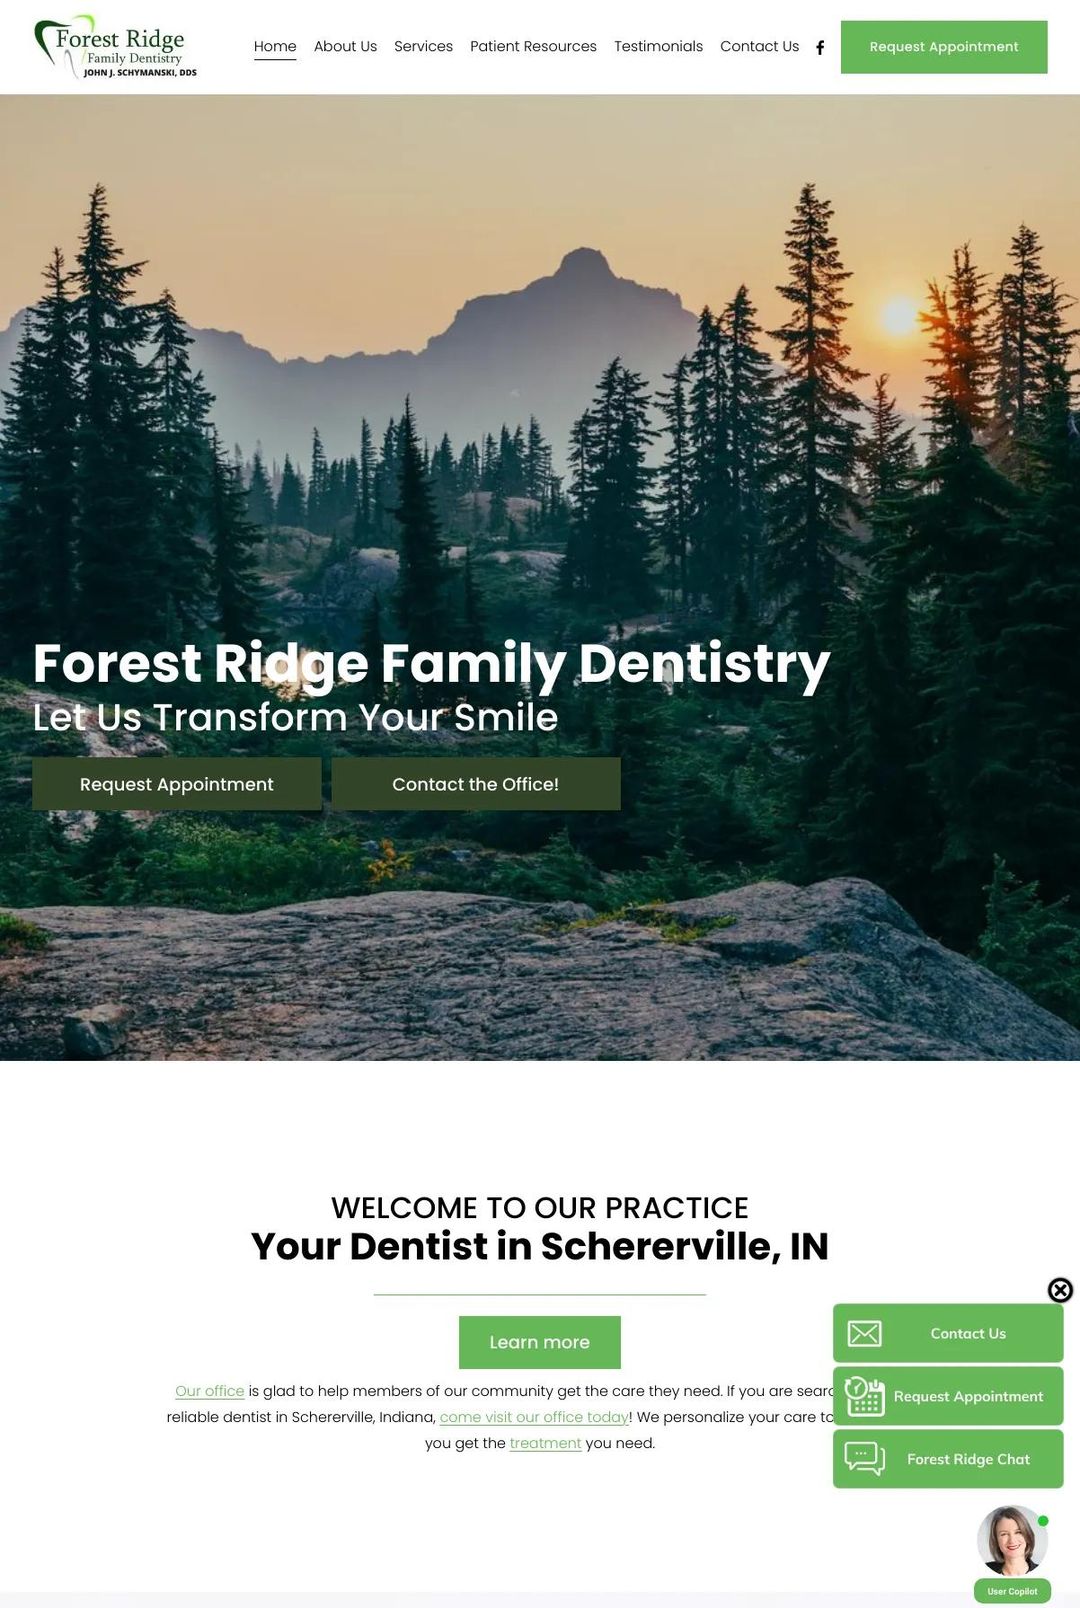 Screenshot 1 of Forest Ridge Family Dentistry (Example Squarespace Dentist Website)